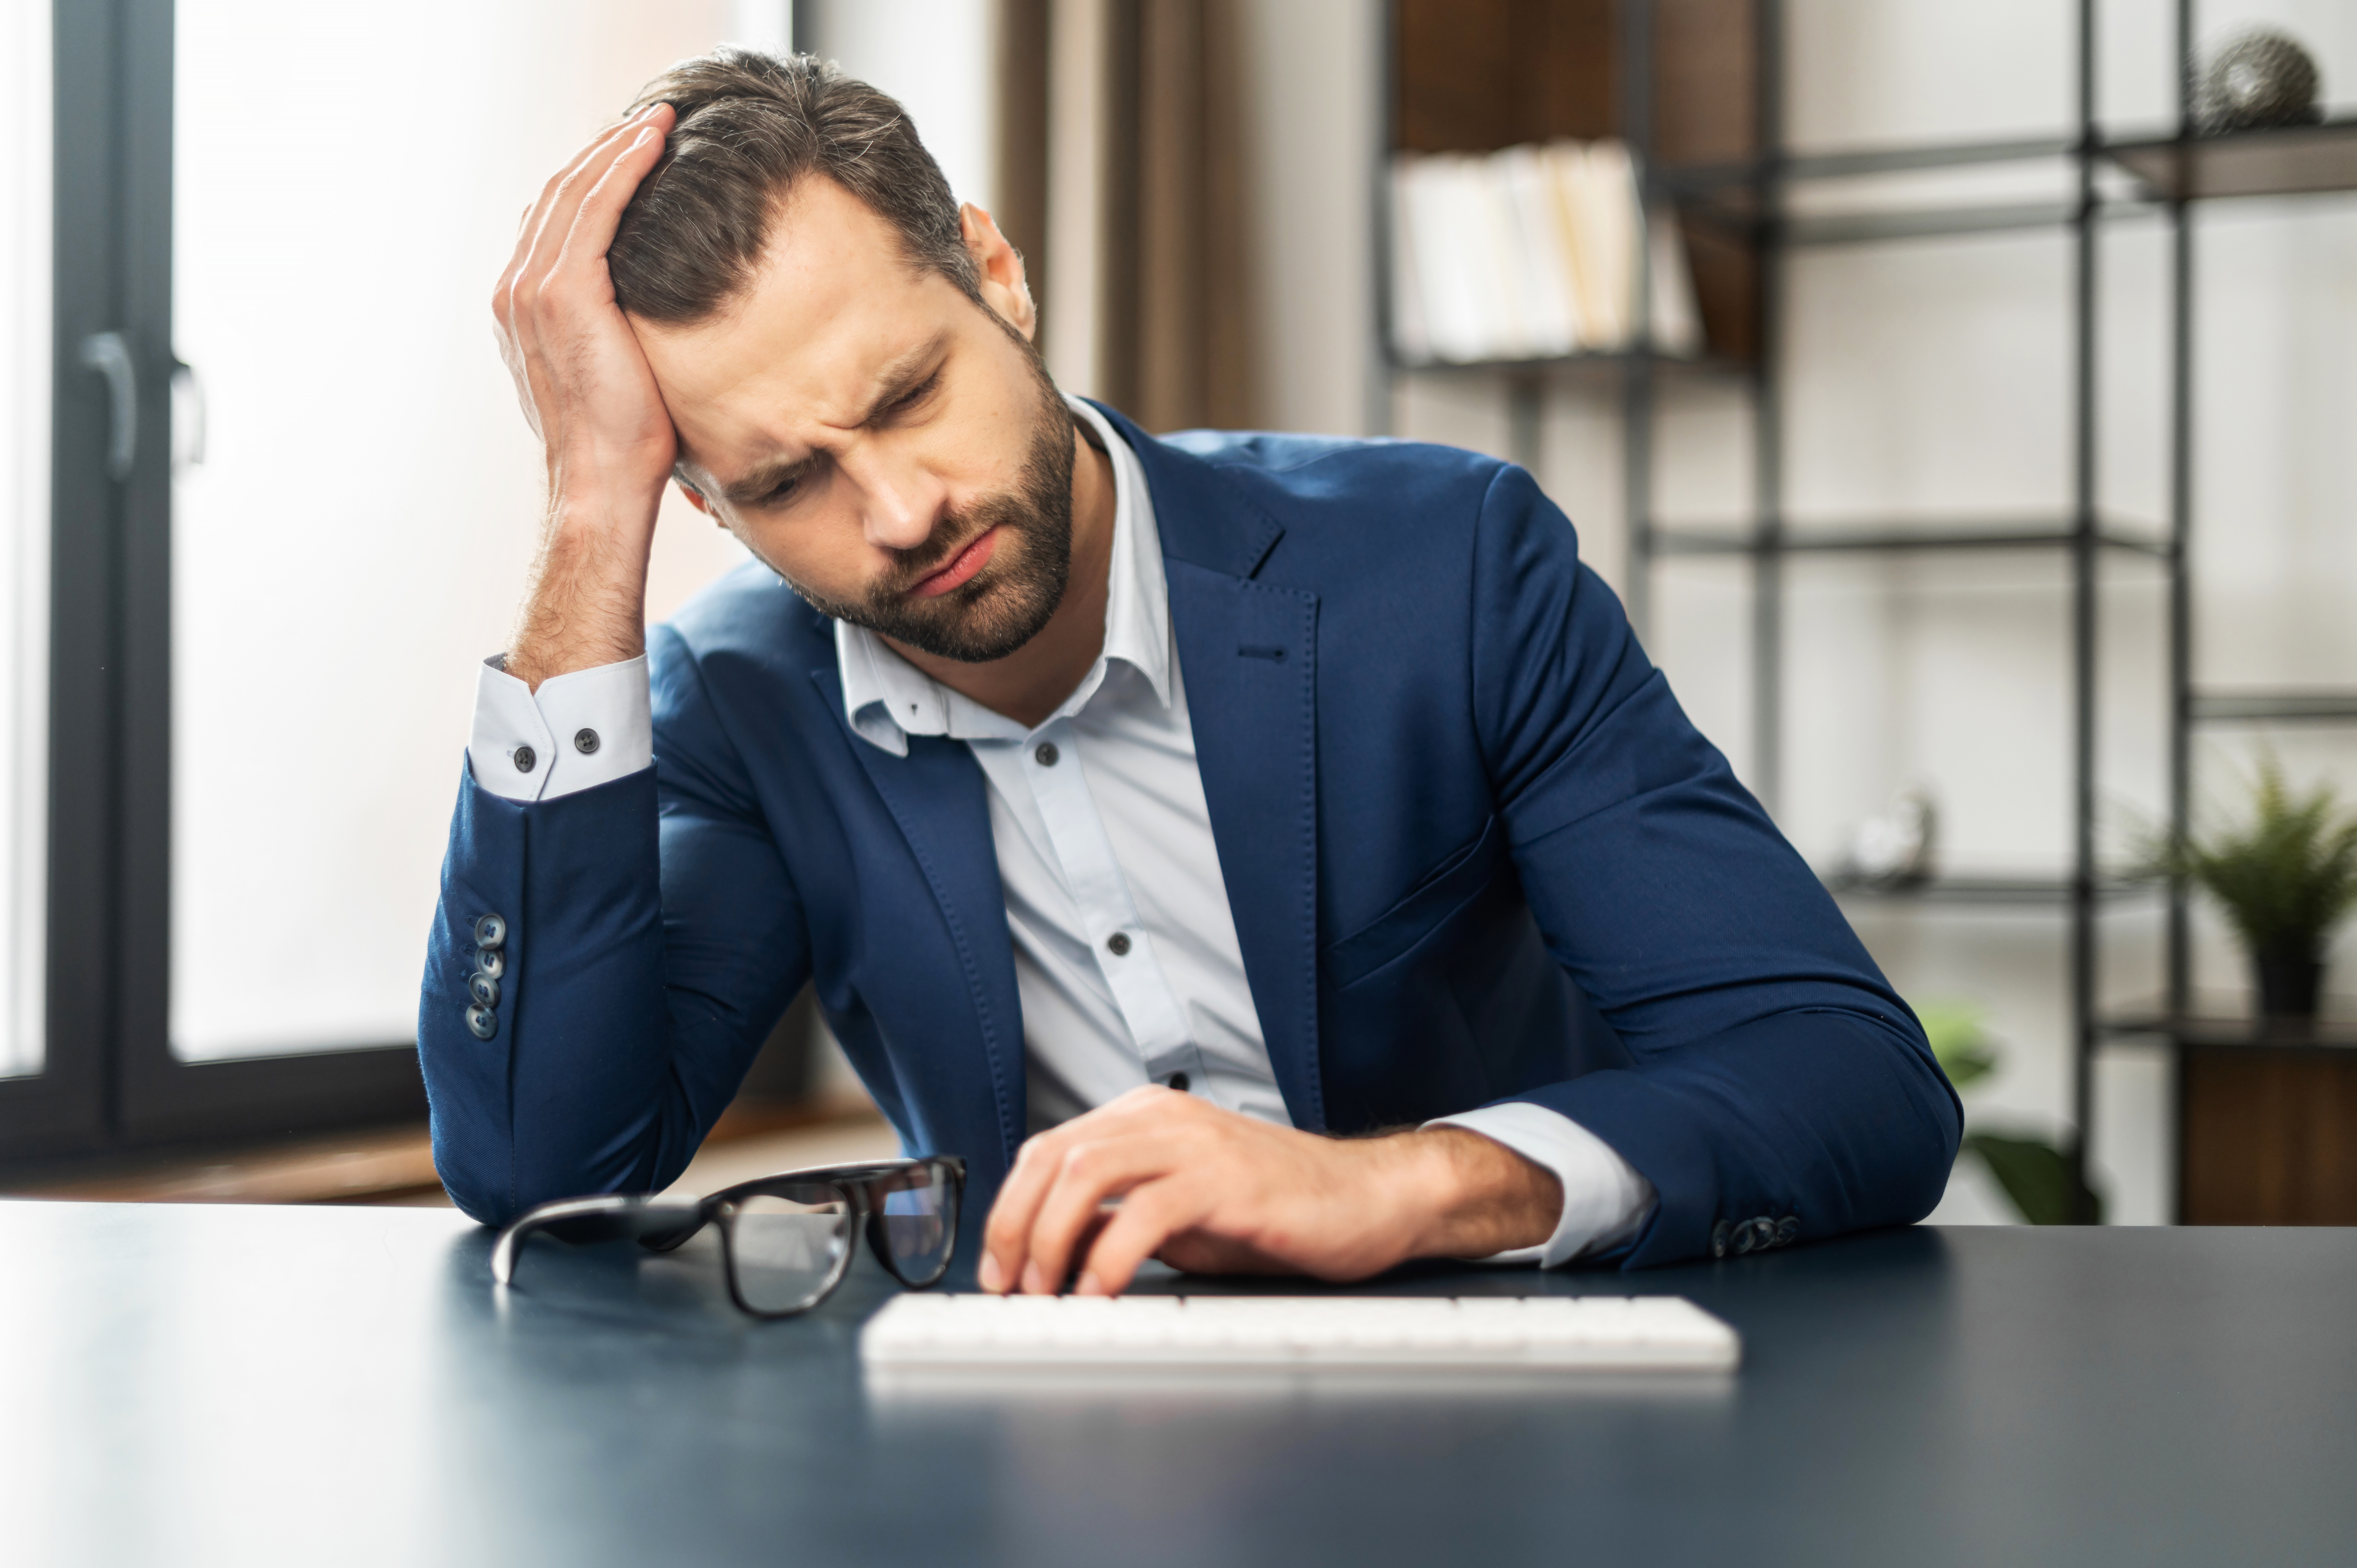 Frustrated man | Source: Shutterstock